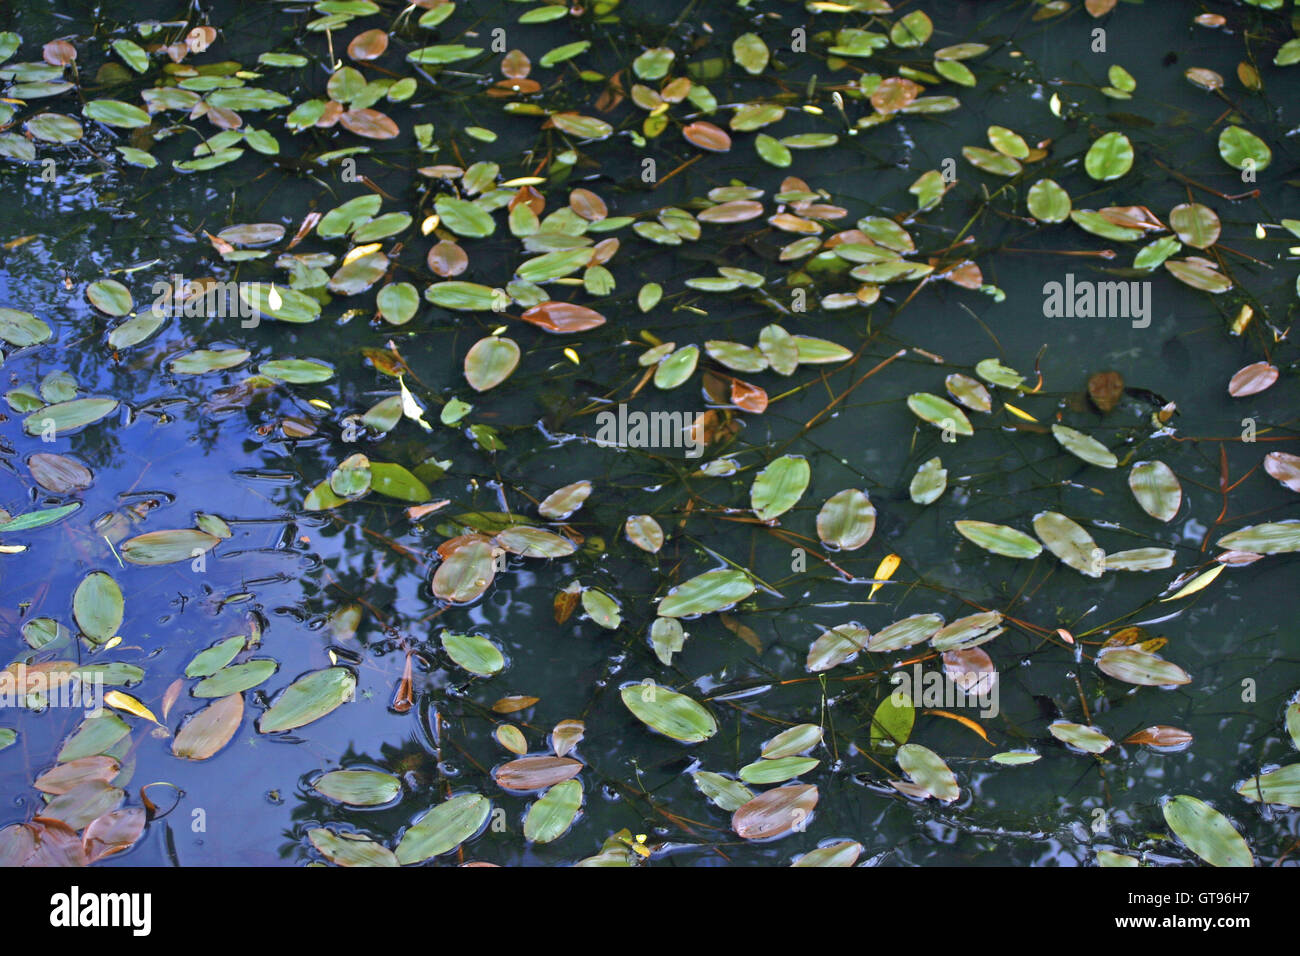 Broad leaved pondweed, Potamogeton natans, floating leaves on a pond surface with reflections. Stock Photo